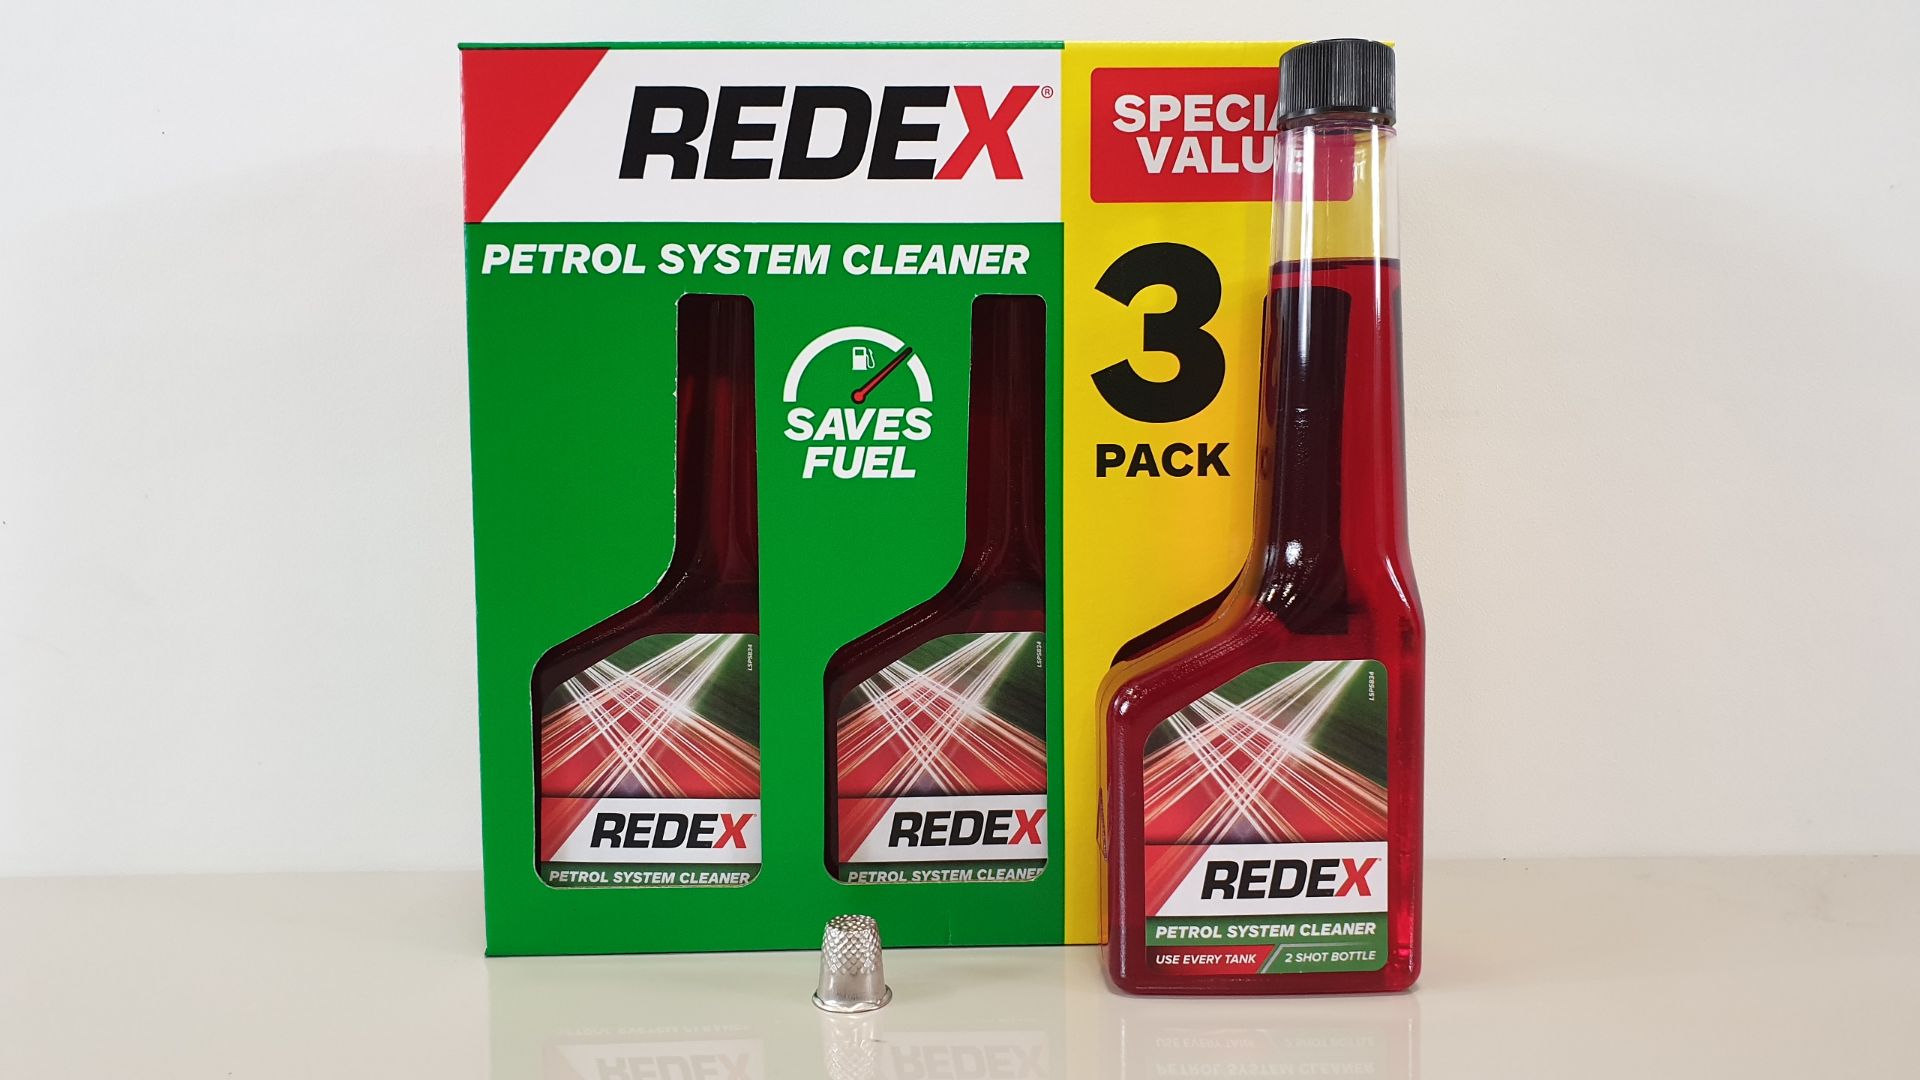 18 X PACKS OF 3 250 ML REDEX PETROL SYSTEM CLEANER - IN 3 CARTONS (RADD0006A)